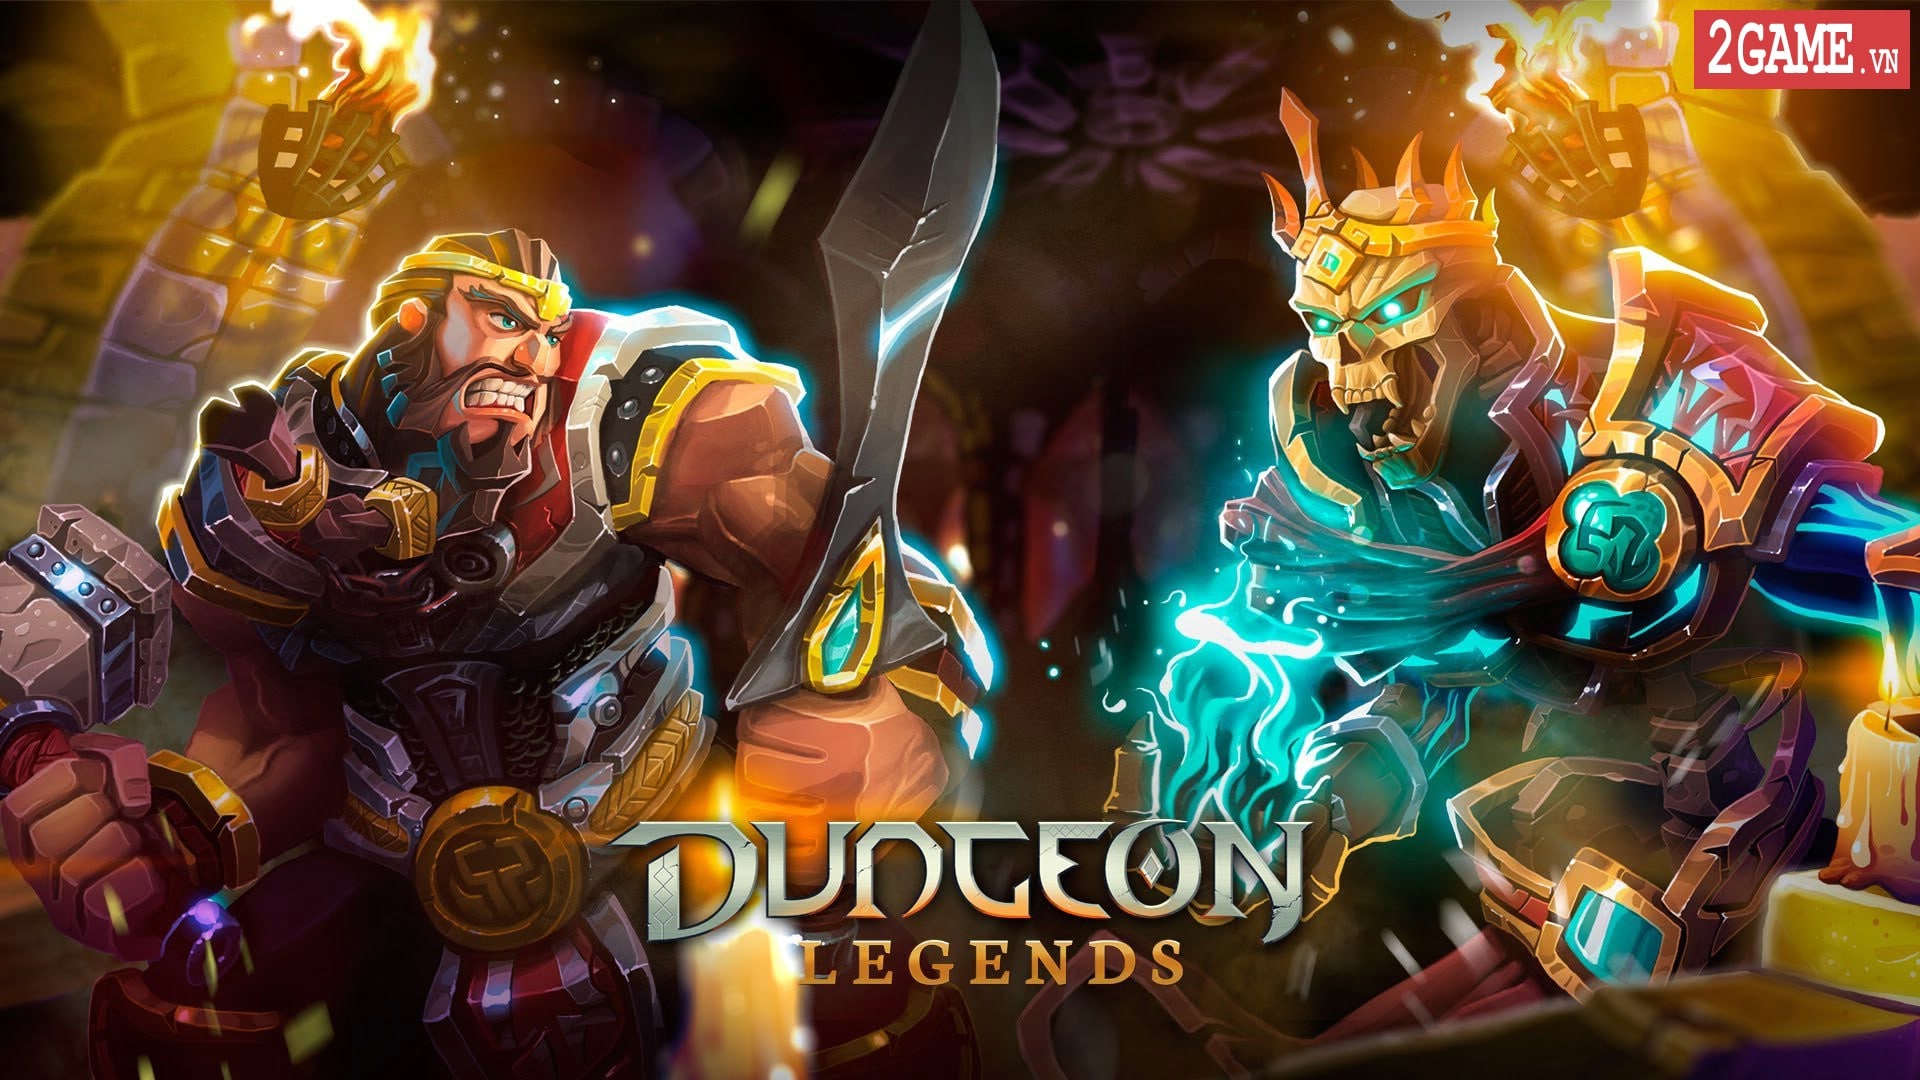 2game-Dungeon-Legends-mobile-3.jpg (1920×1080)